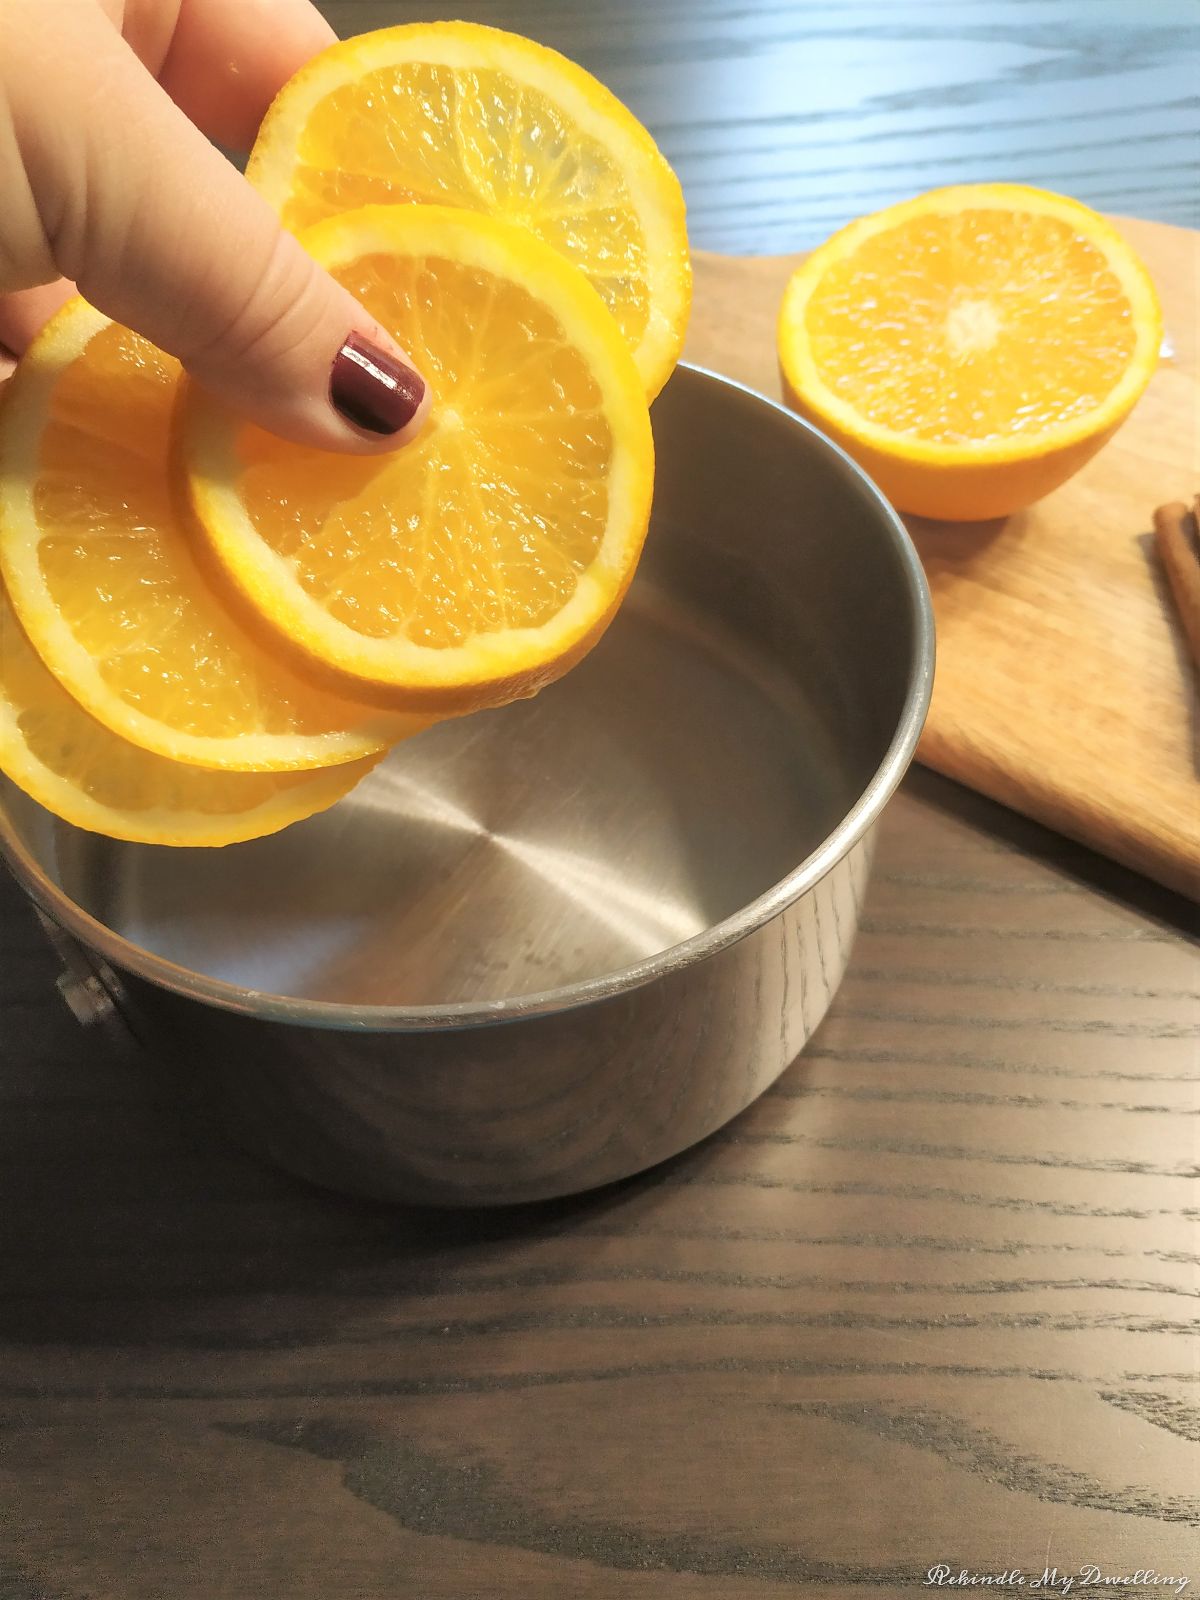 Adding orange slices into the pot of water.